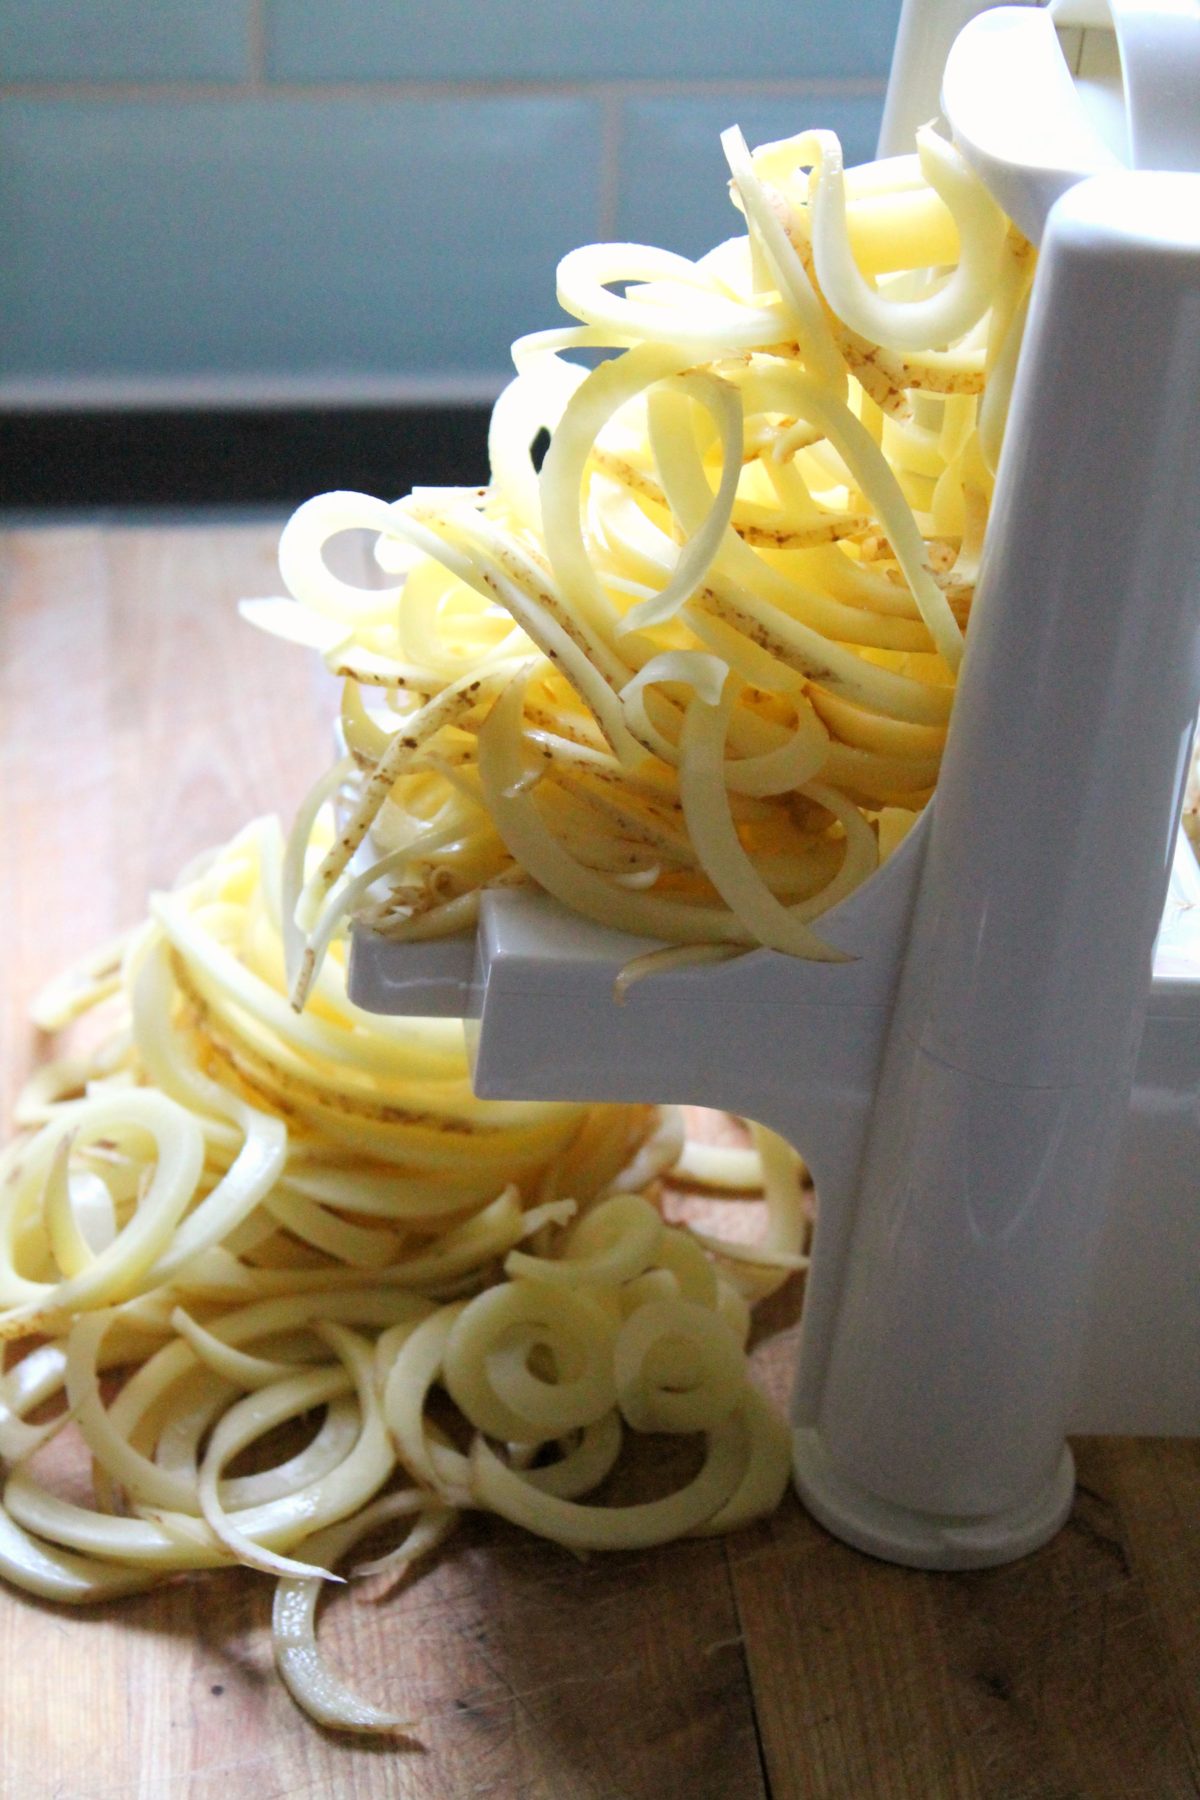 Super easy to make with a spiralizer! You can be eating them in half an hour with minimal effort.